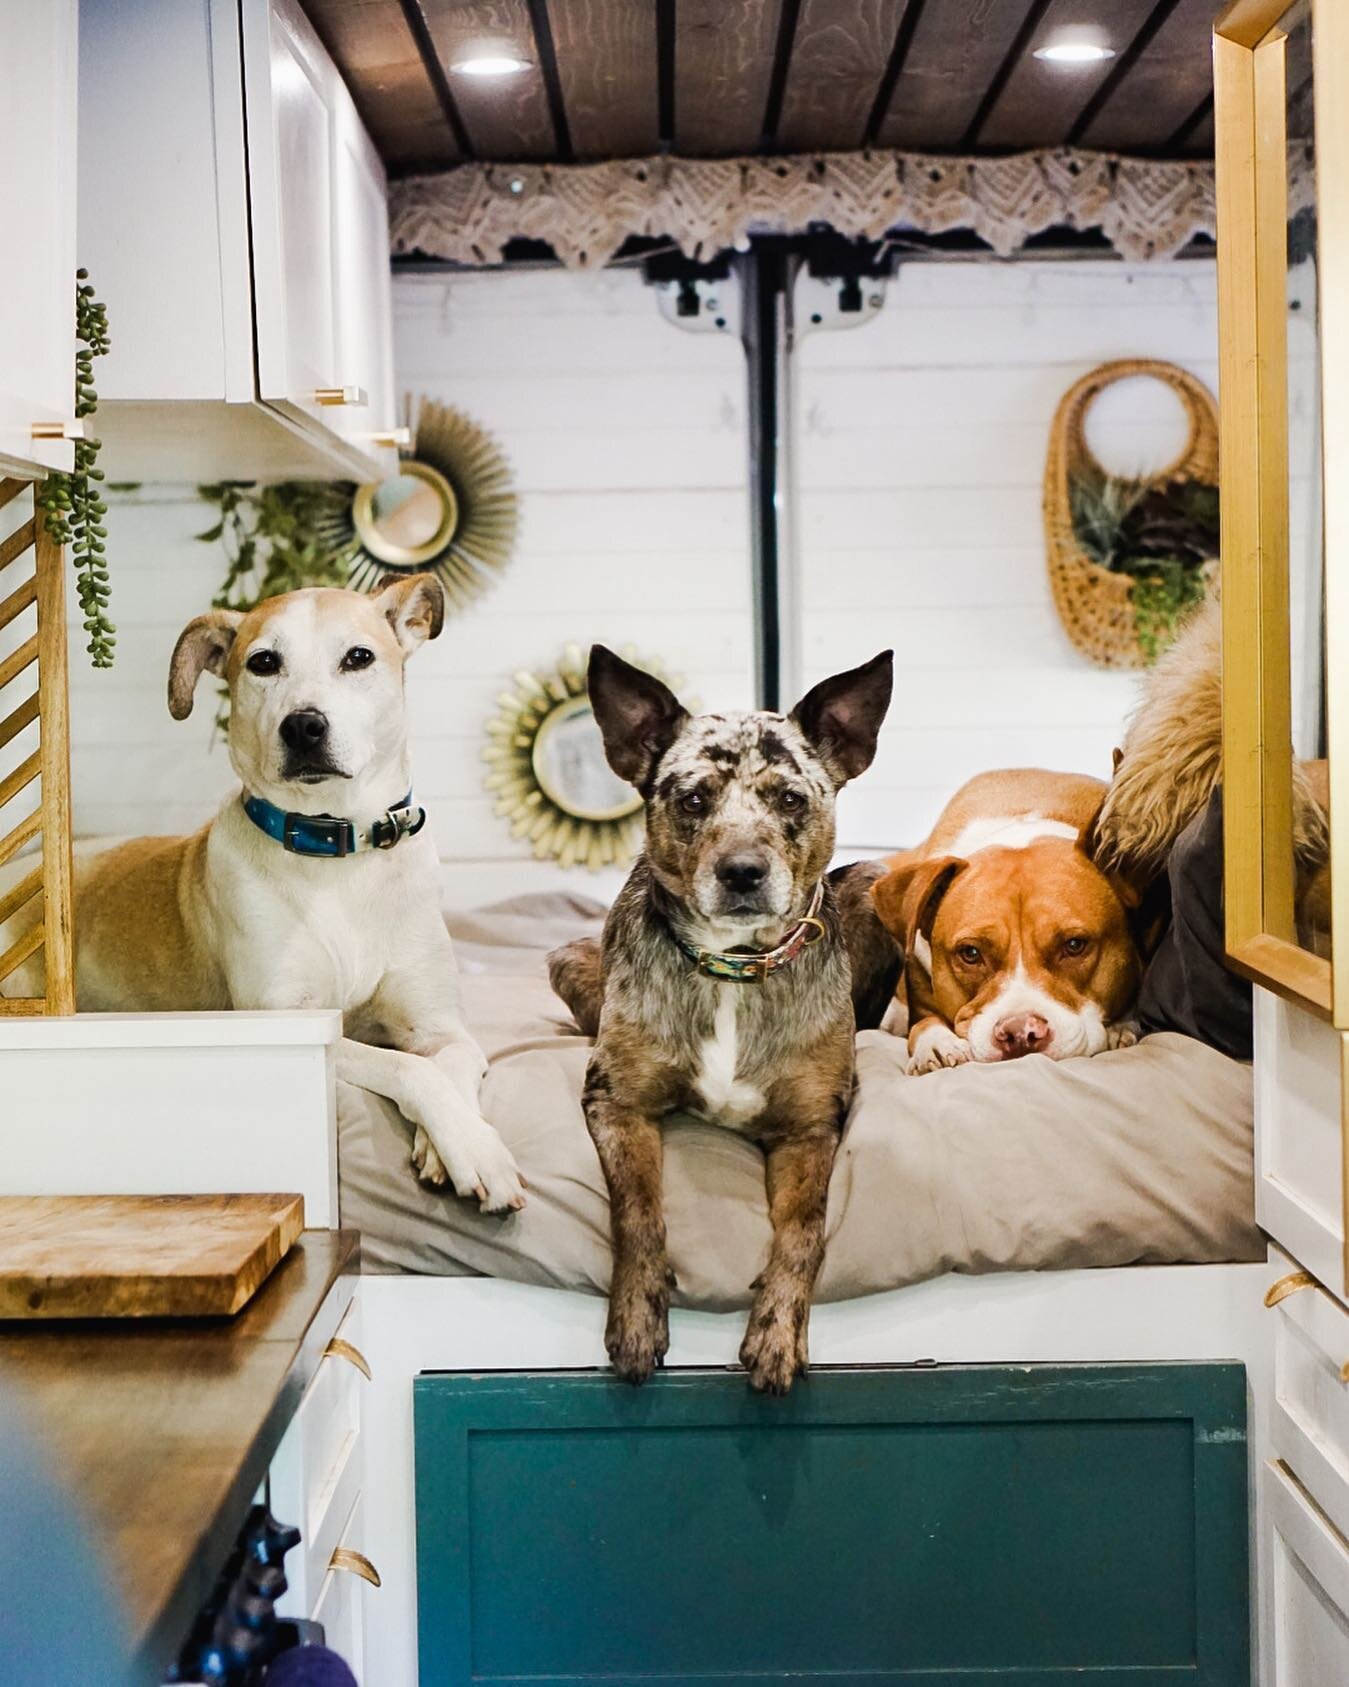 Every day we get to hang out with this funny bunch is a hoot. To say the least. 

Each of their &ldquo;gotcha&rdquo; stories are quite unique. 

**Keep an eye out next week for Koi&rsquo;s gotcha story and how exactly we ended up with 3 dogs!**
.
.
.